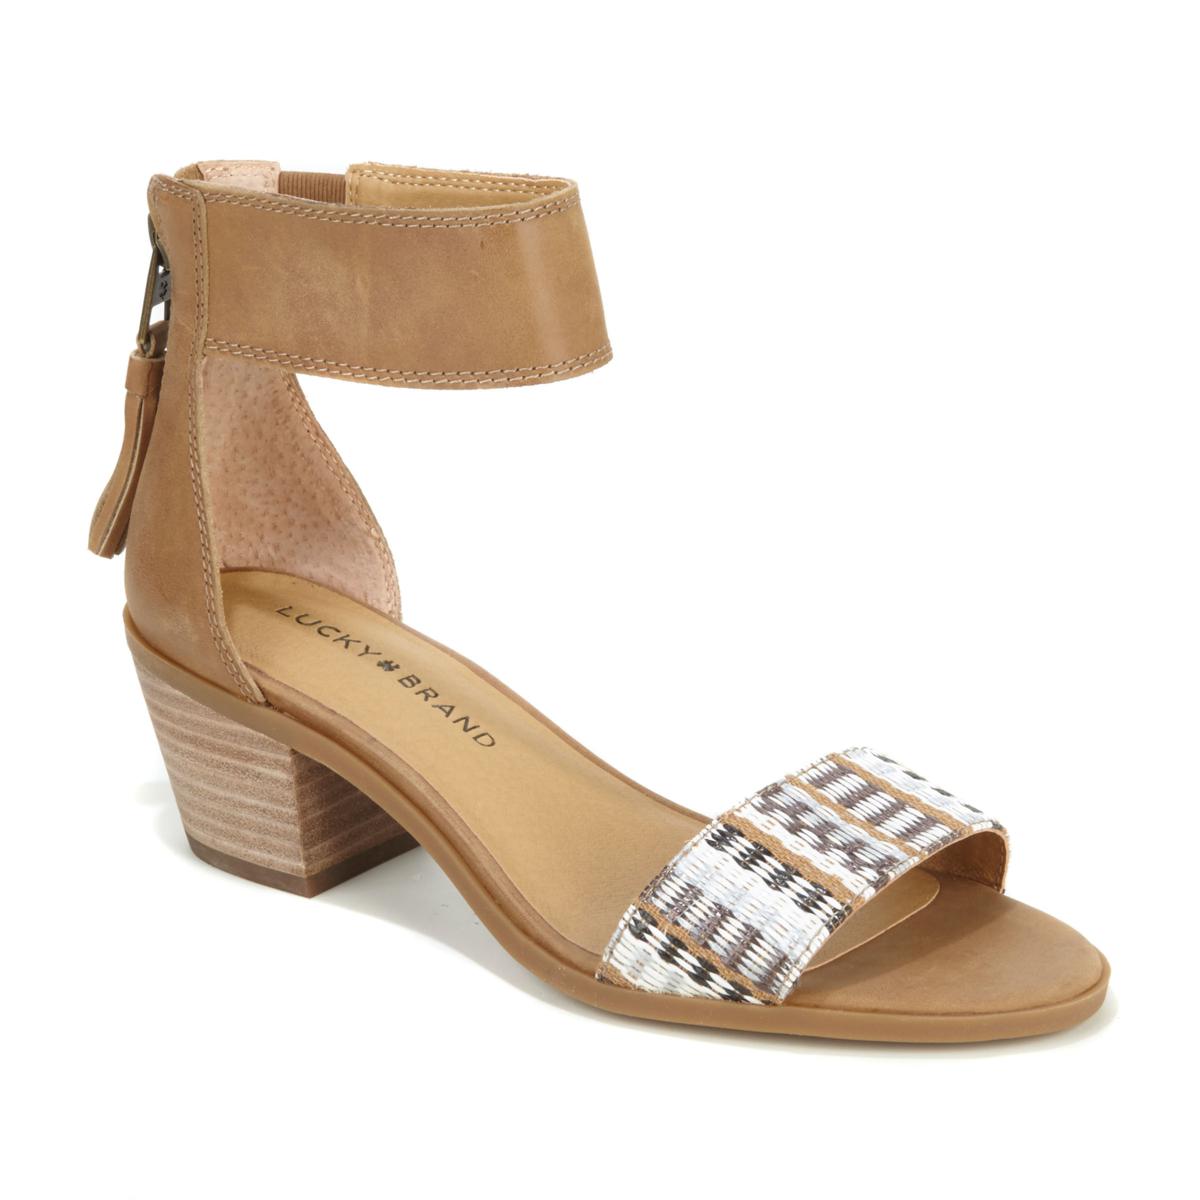 The 5 Summer Sandal Styles You Should Have In Your Closet - HSN Blogs